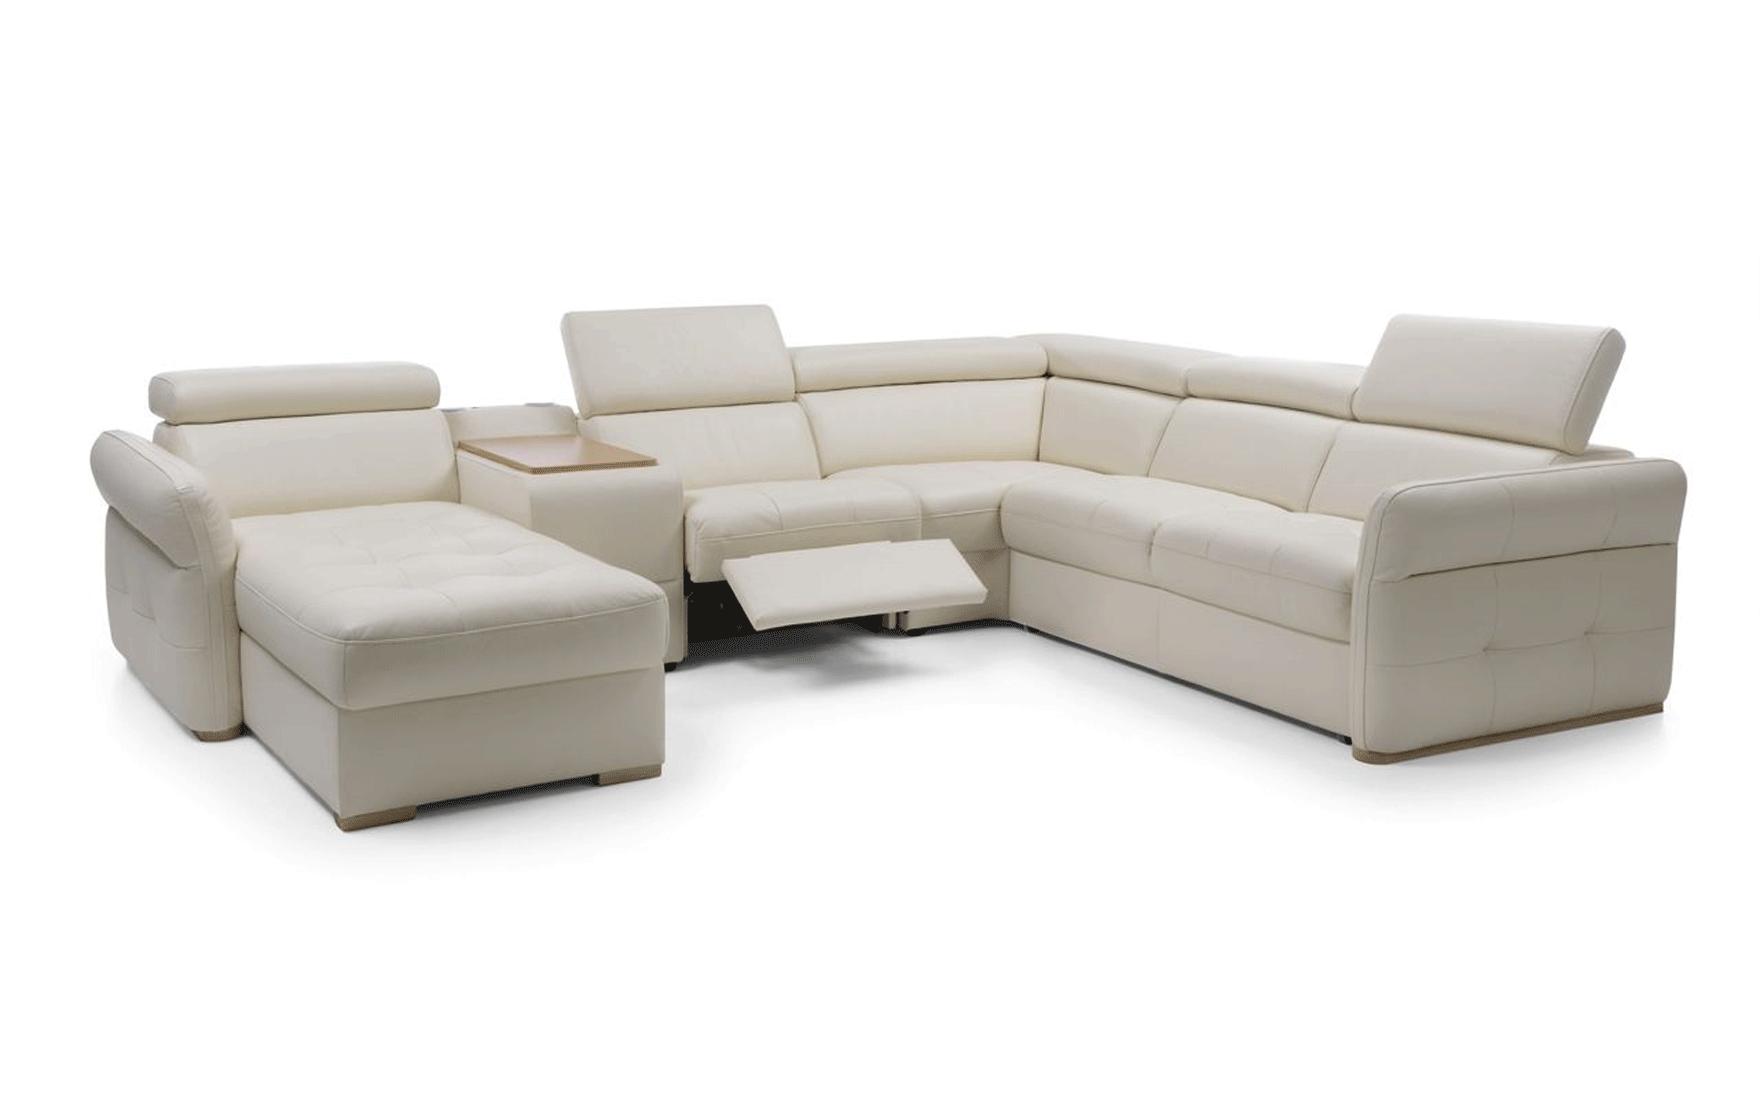 ESF Massimo Sectional Sofa Bed